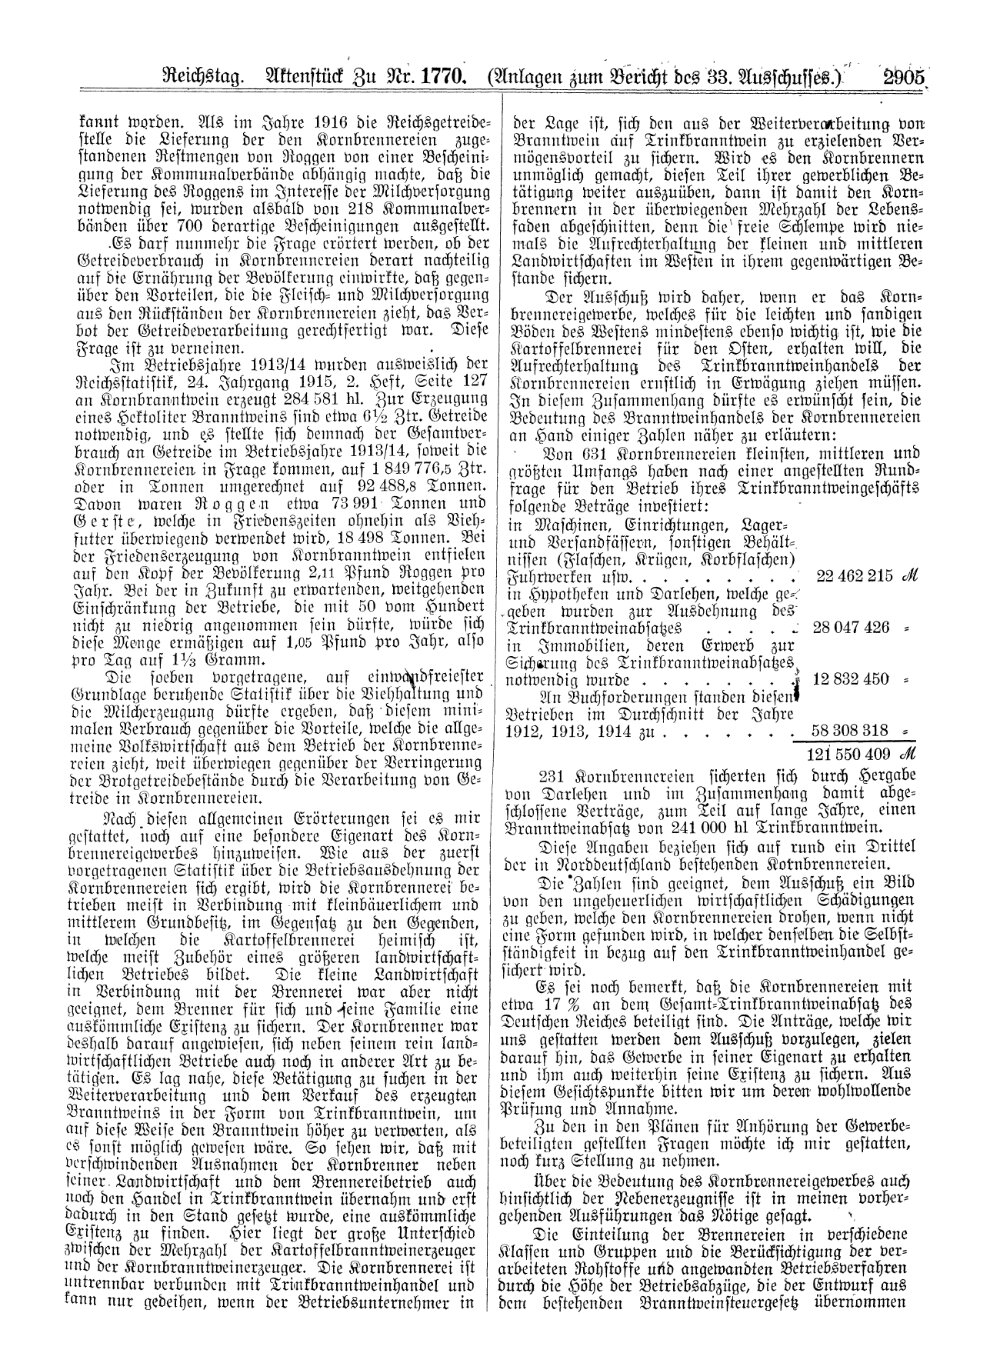 Scan of page 2905